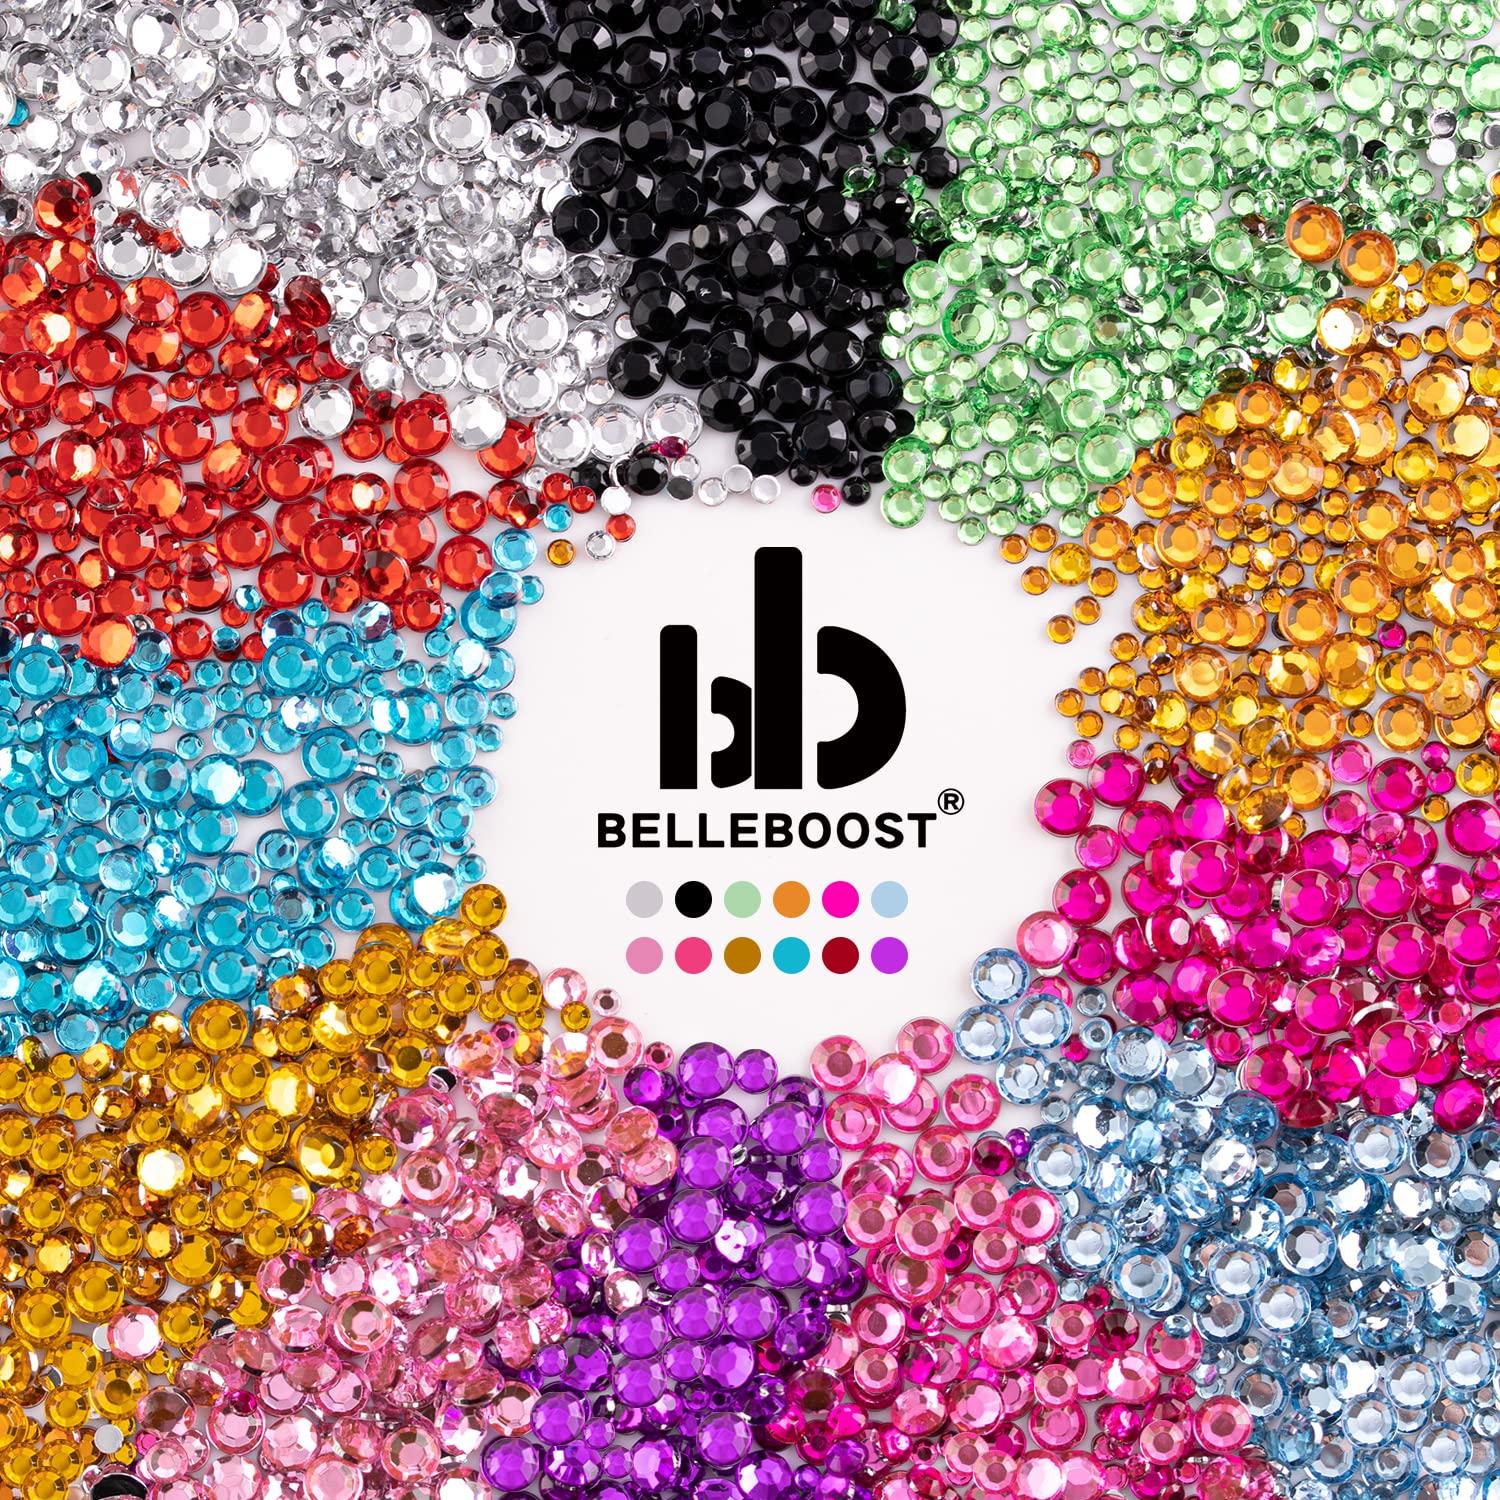 Two Packs of Flatback Rhinestones 4520 Pcs Colorful Nail Art Rhinestones  Flatback Crystal ColorfulABTransparent White Rhinestone with Picker Pencil  and Tweezer For Nail Art and Decoration 03-AB Transparent White Mixe